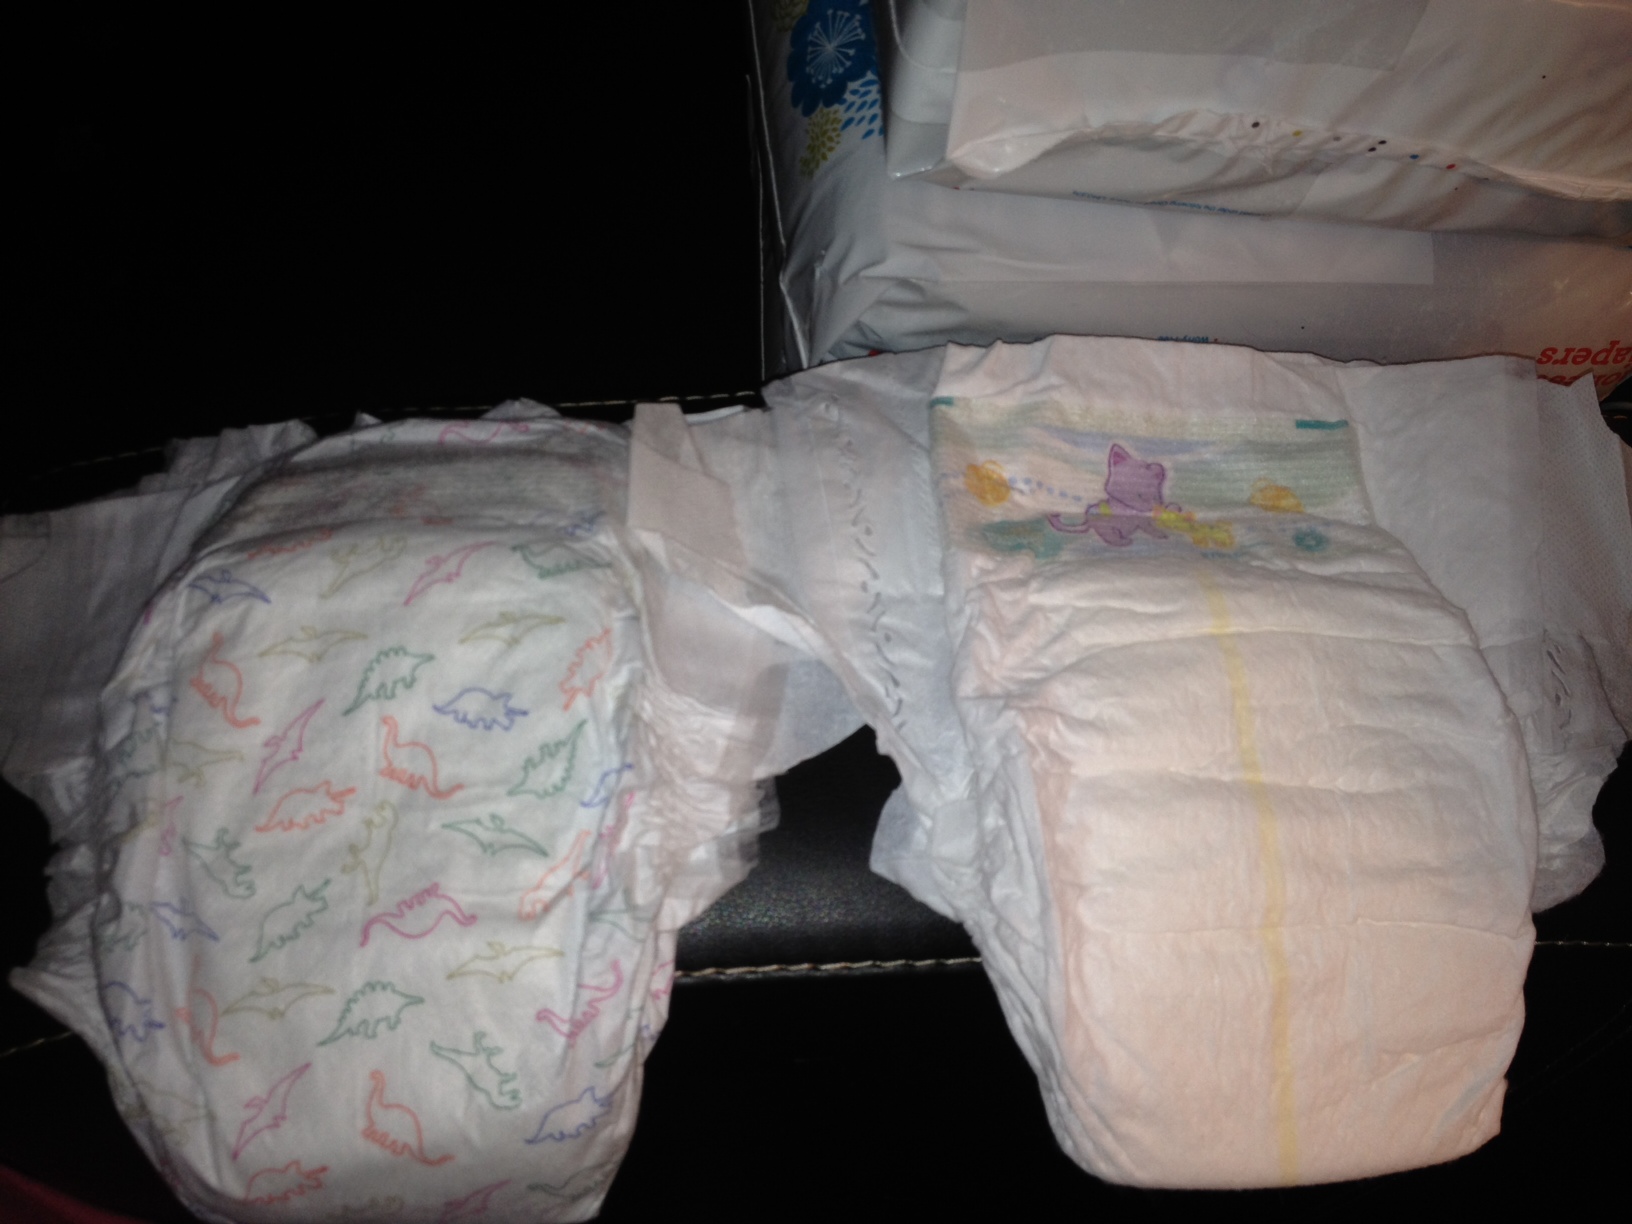 Disposable diapers are more breathable, but their moisturizing, absorbent c...